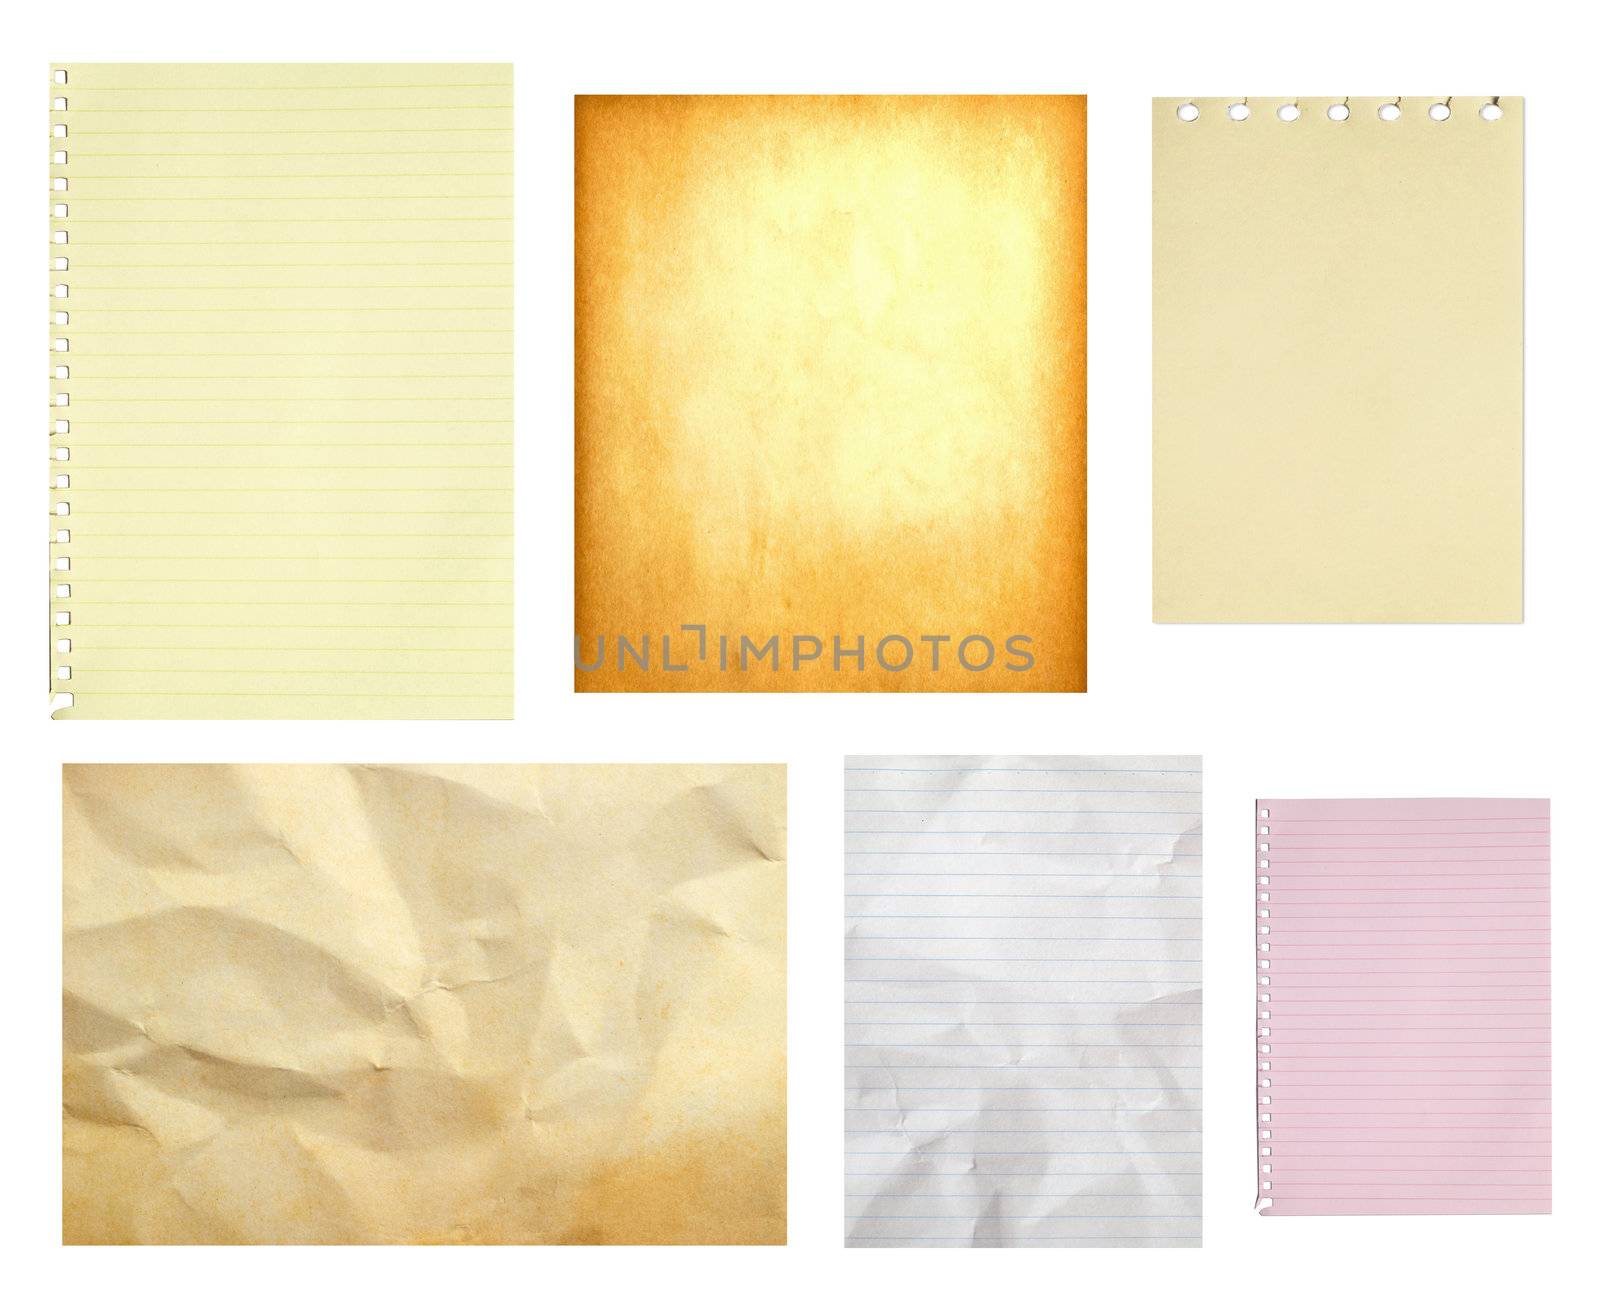 set of paper isolated on white background